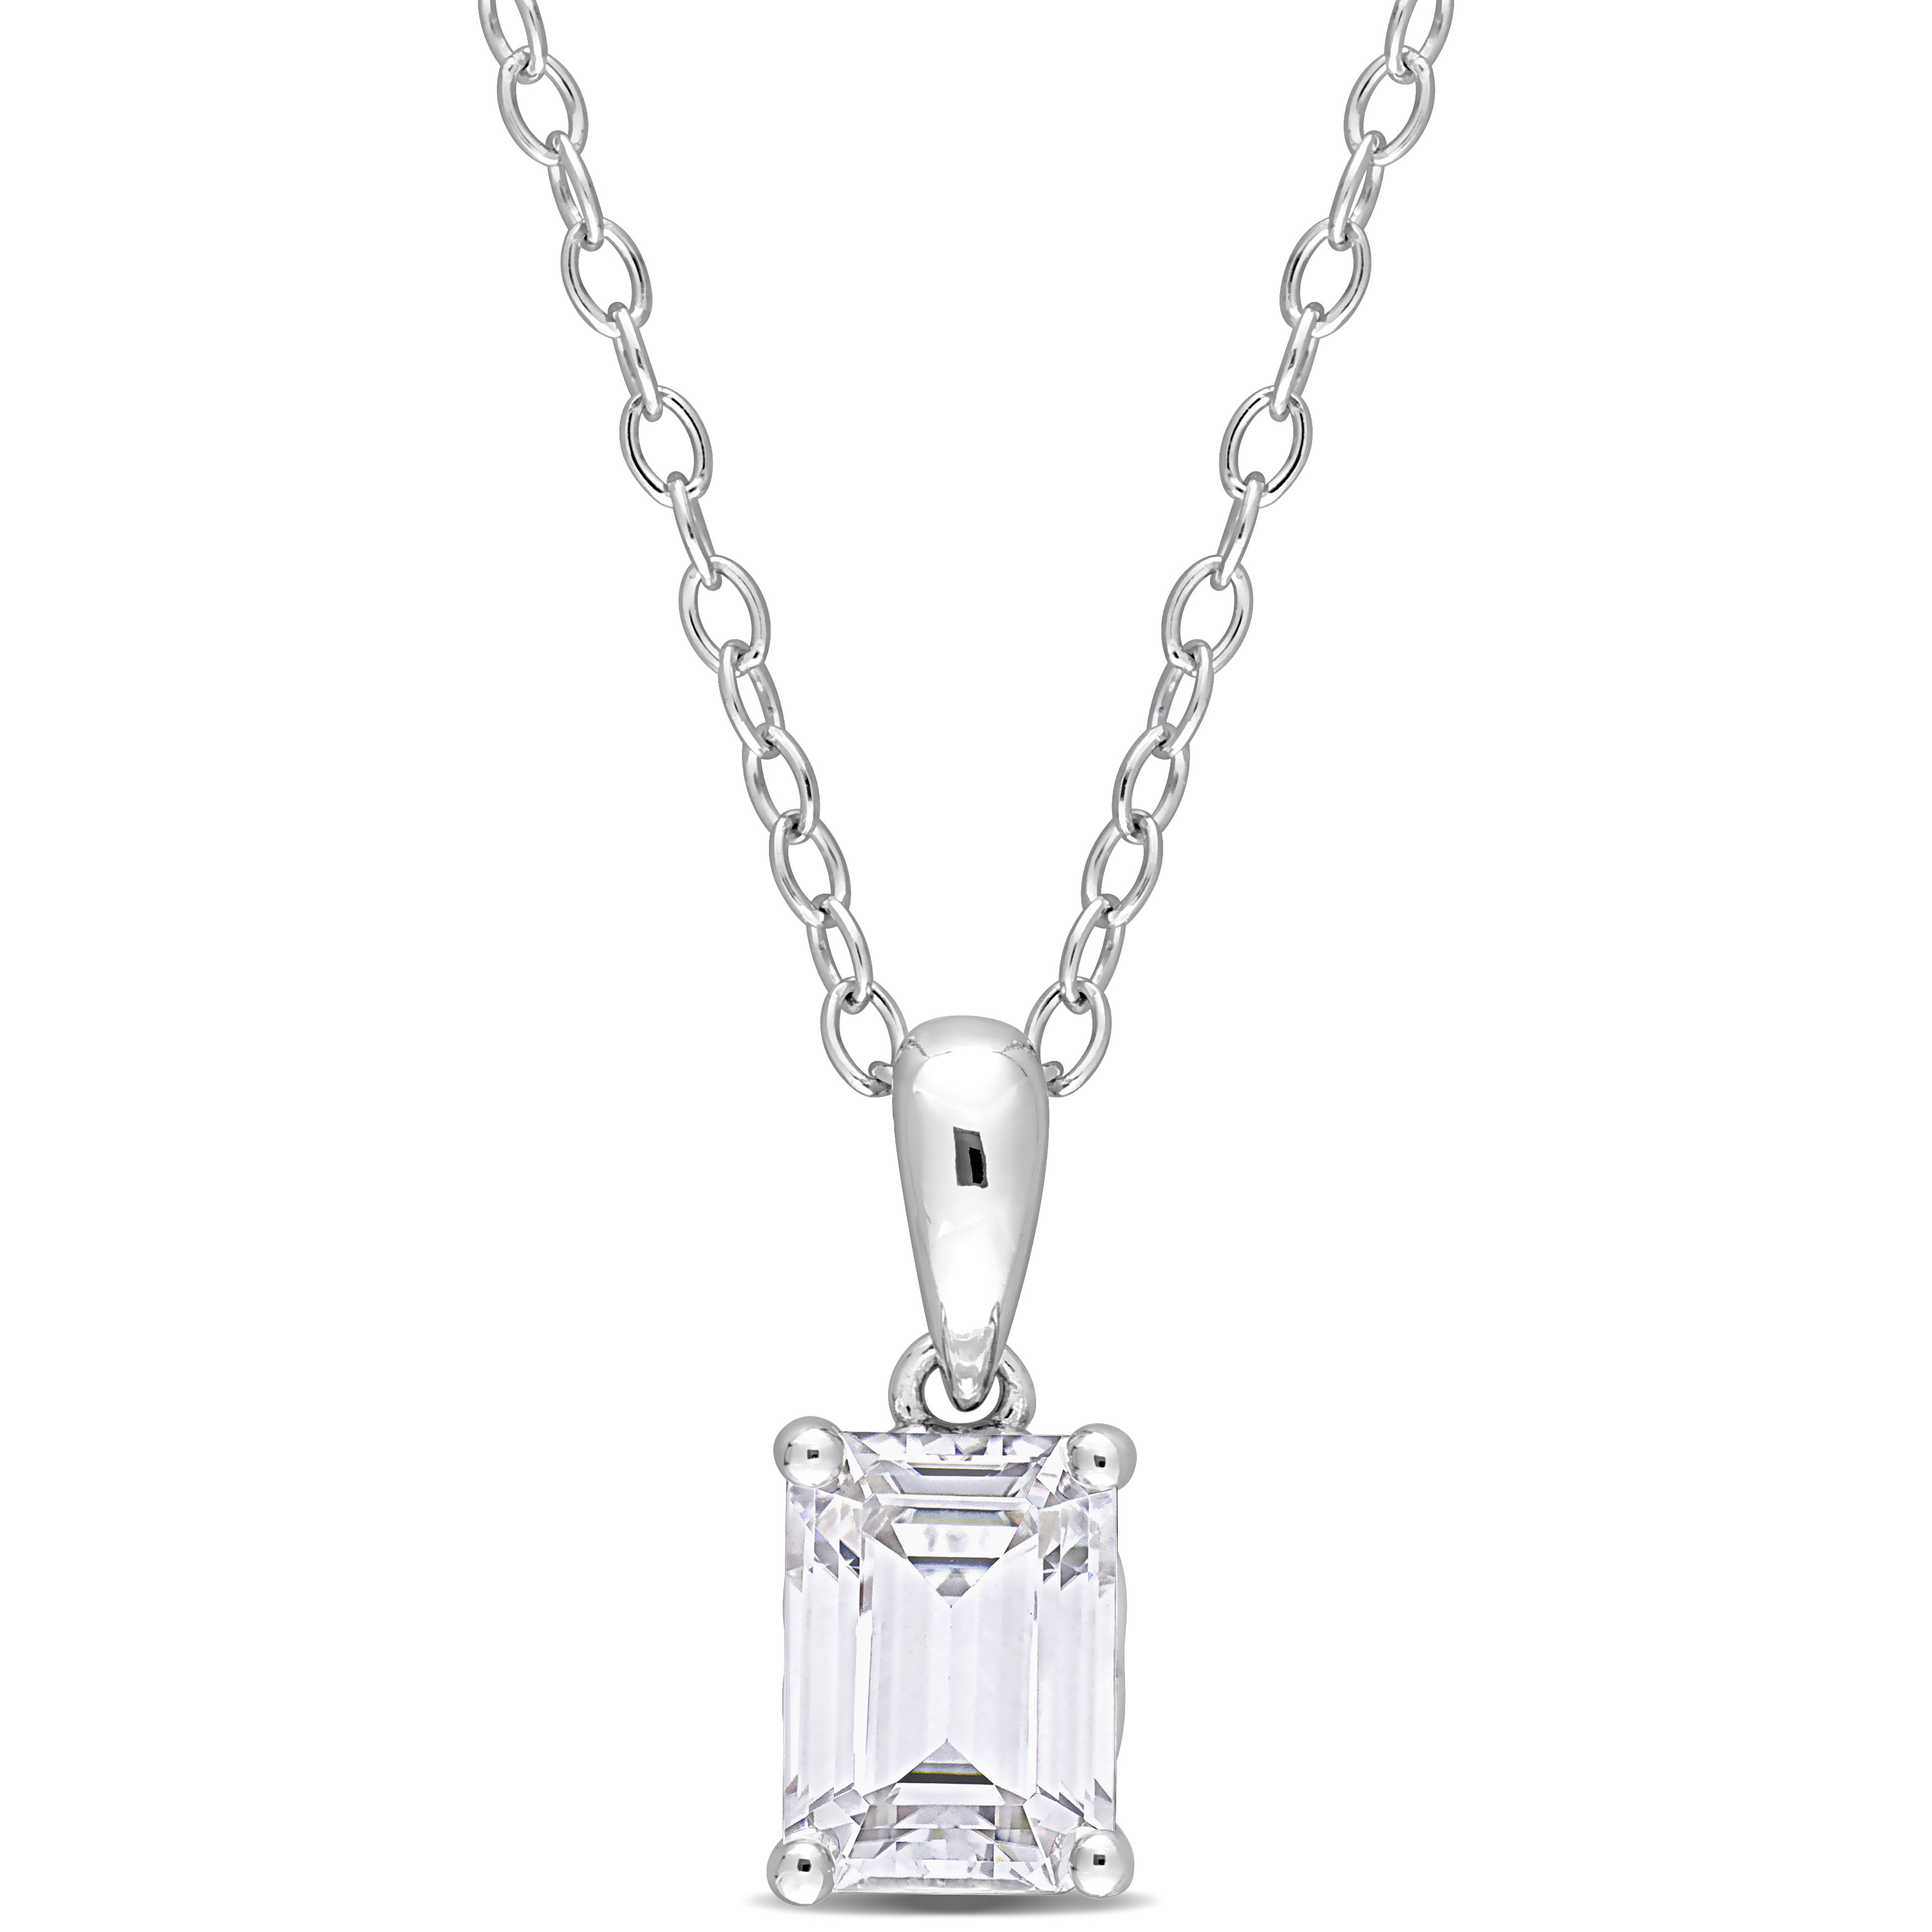 1 1/3 CT TGW Emerald Cut White Topaz Solitaire Heart Design Pendant with Chain in Sterling Silver - 18 in.